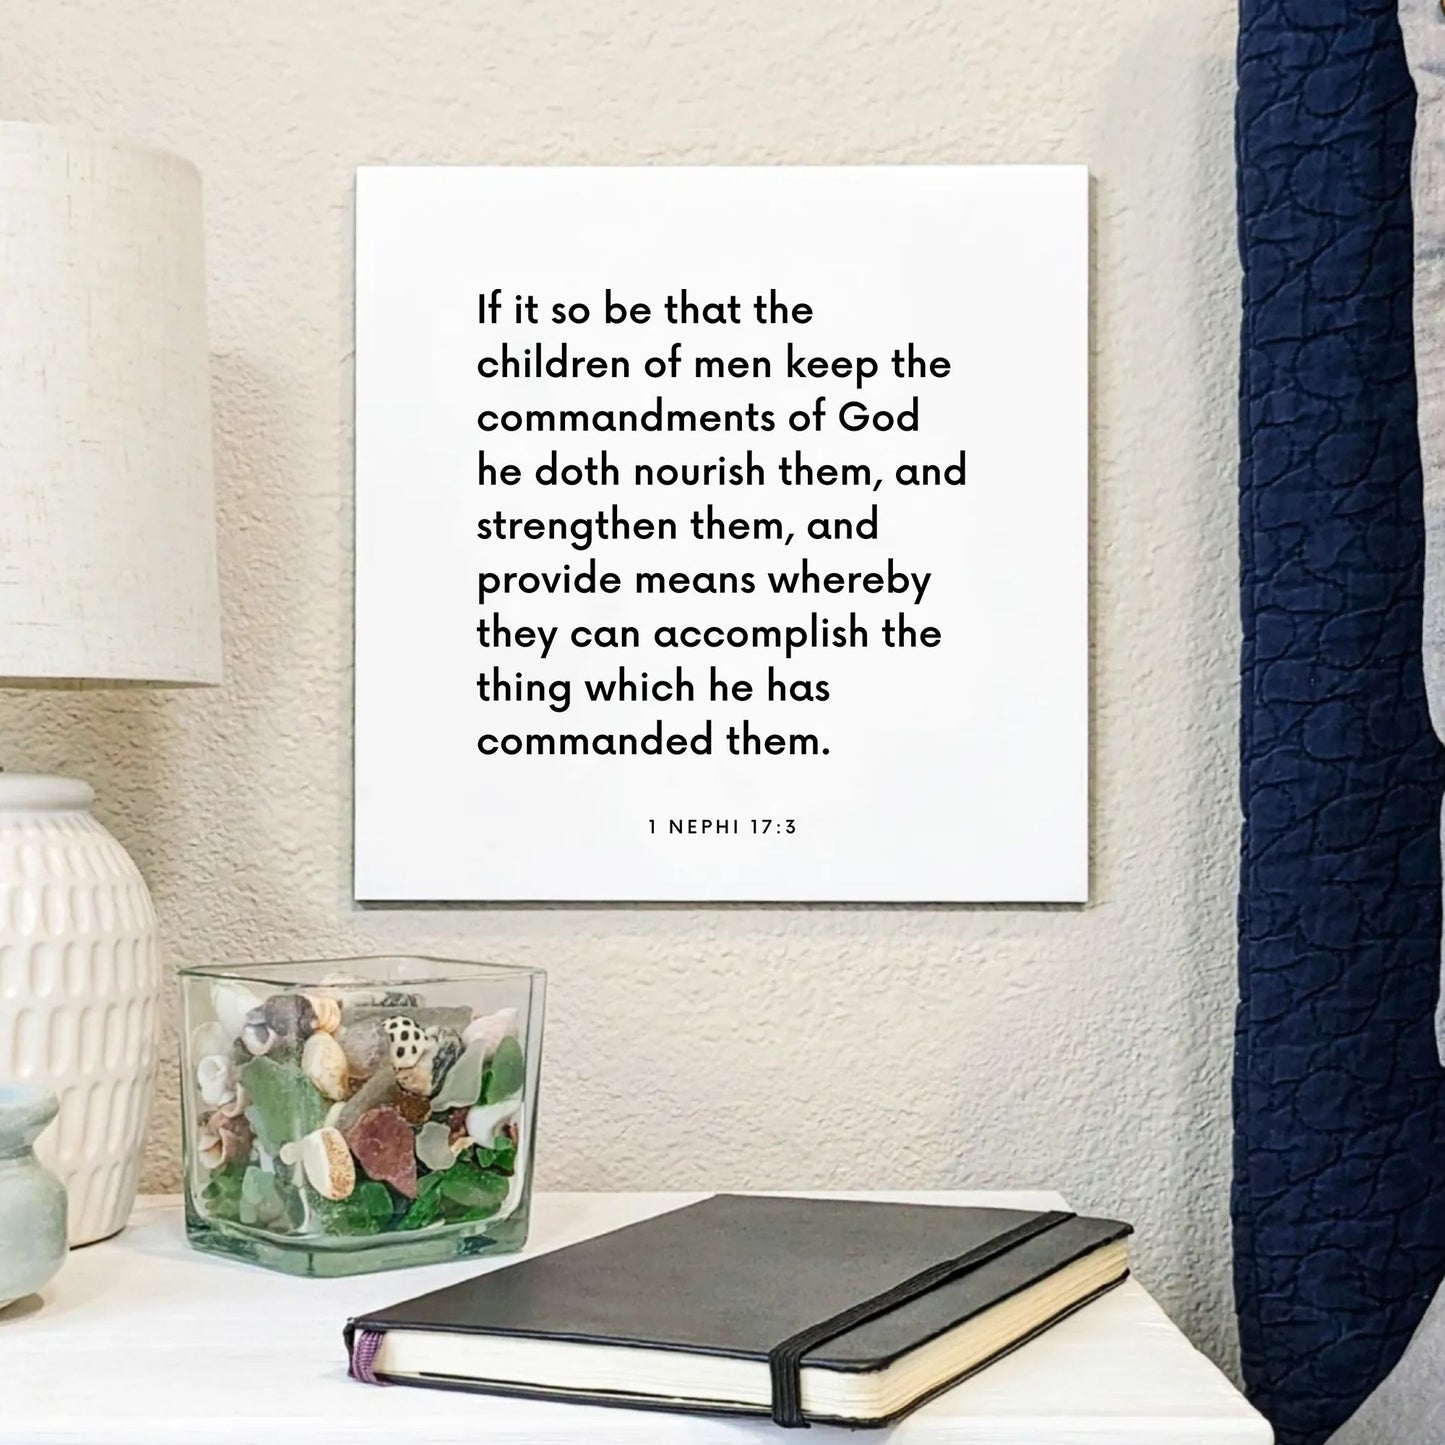 Bedside mouting of the scripture tile for 1 Nephi 17:3 - "If the children of men keep the commandments of God"